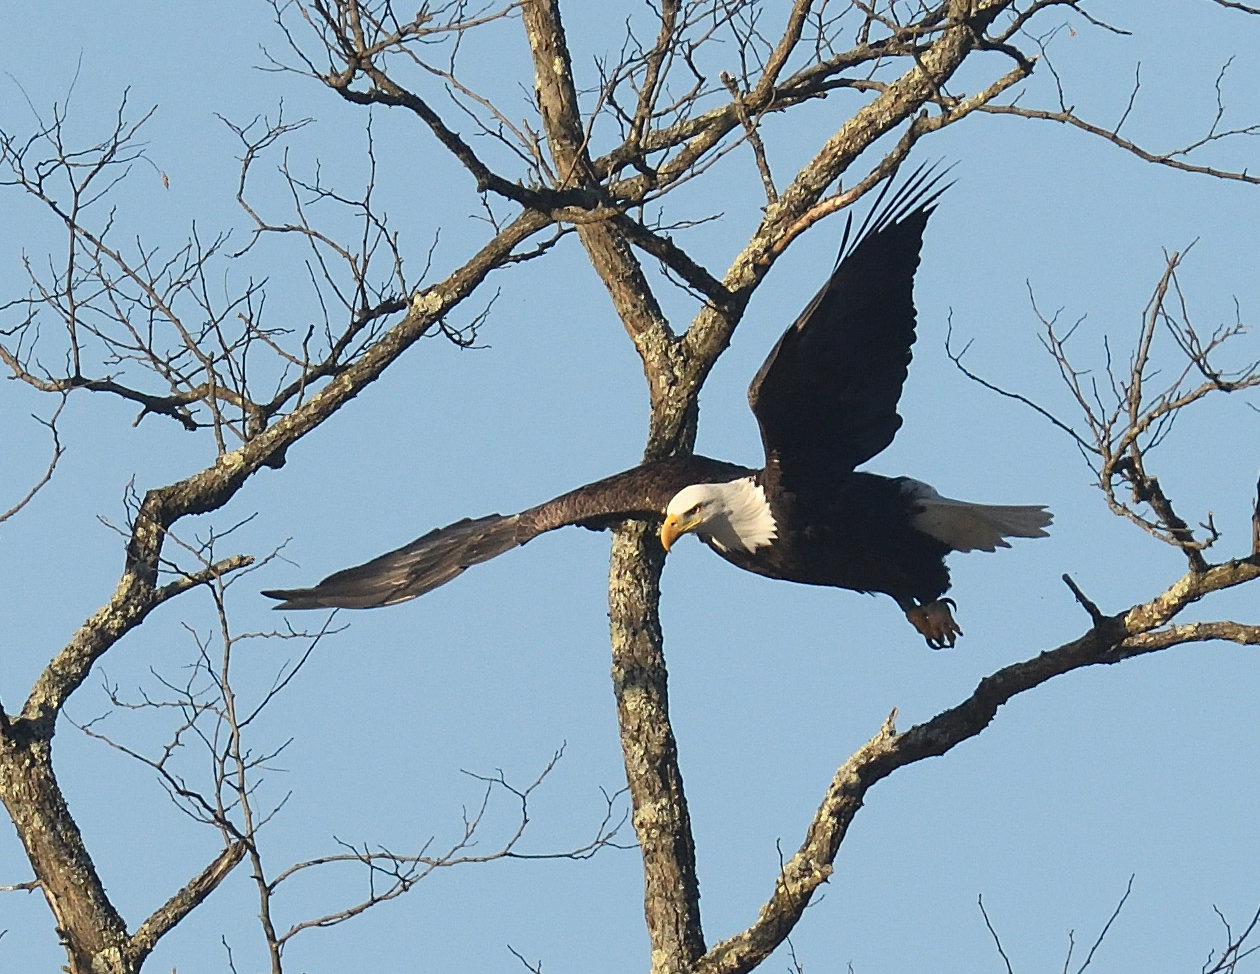 About a tenth of a second later, the eagle is more than halfway through the first down-stroke of its wings. Notice that the leading edge of the wings are pitched slightly towards the ground. This provides the eagle with additional forward thrust and lift so that the eagle remains airborne.